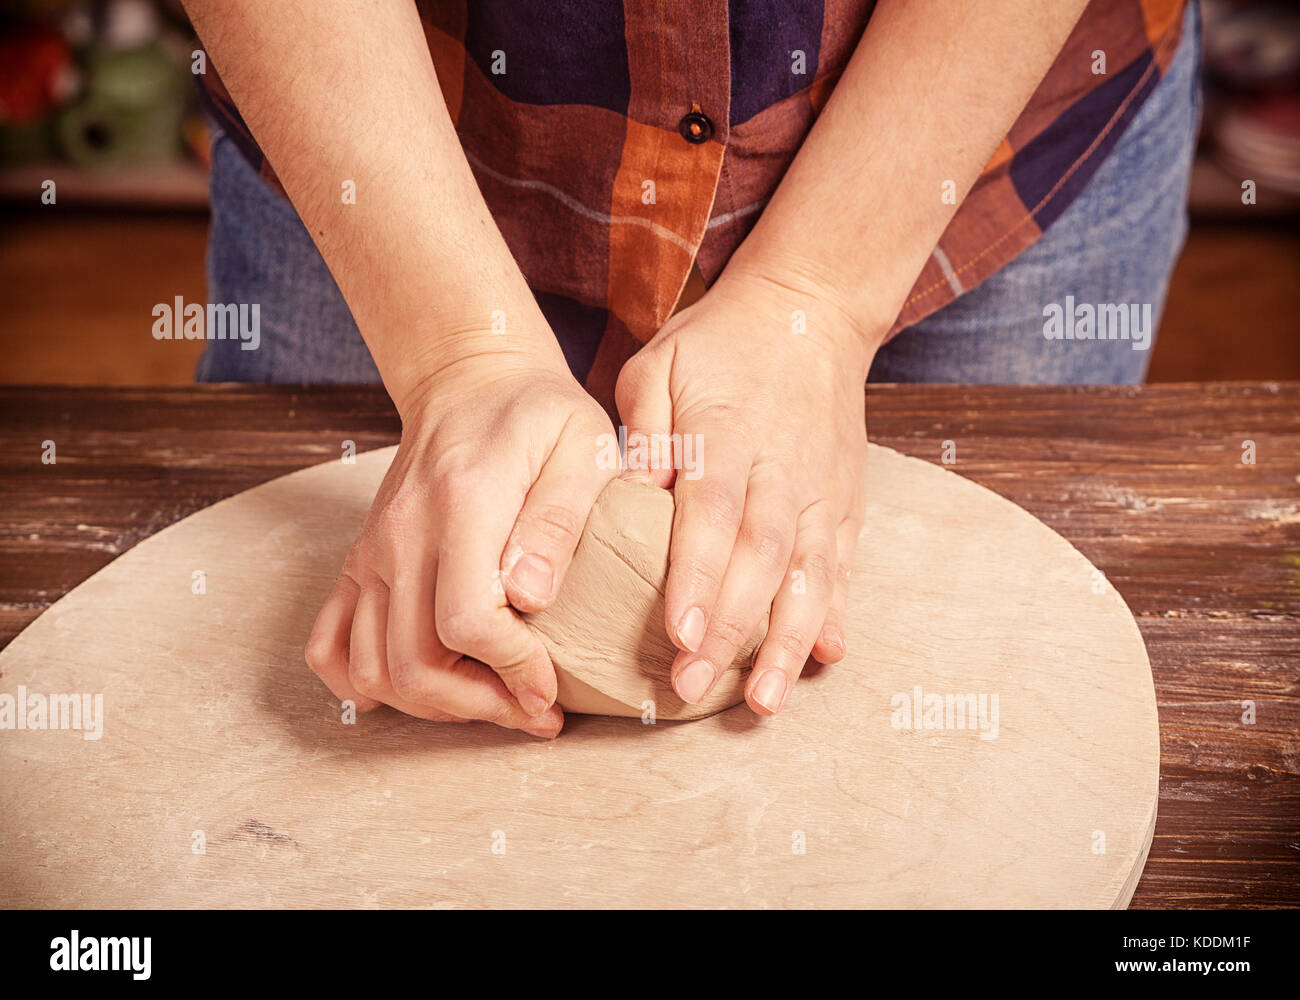 A young woman in a plaid shirt and jeans kneads the clay with her hands before working on the pottery circle of a plate on a wooden circle in the work Stock Photo